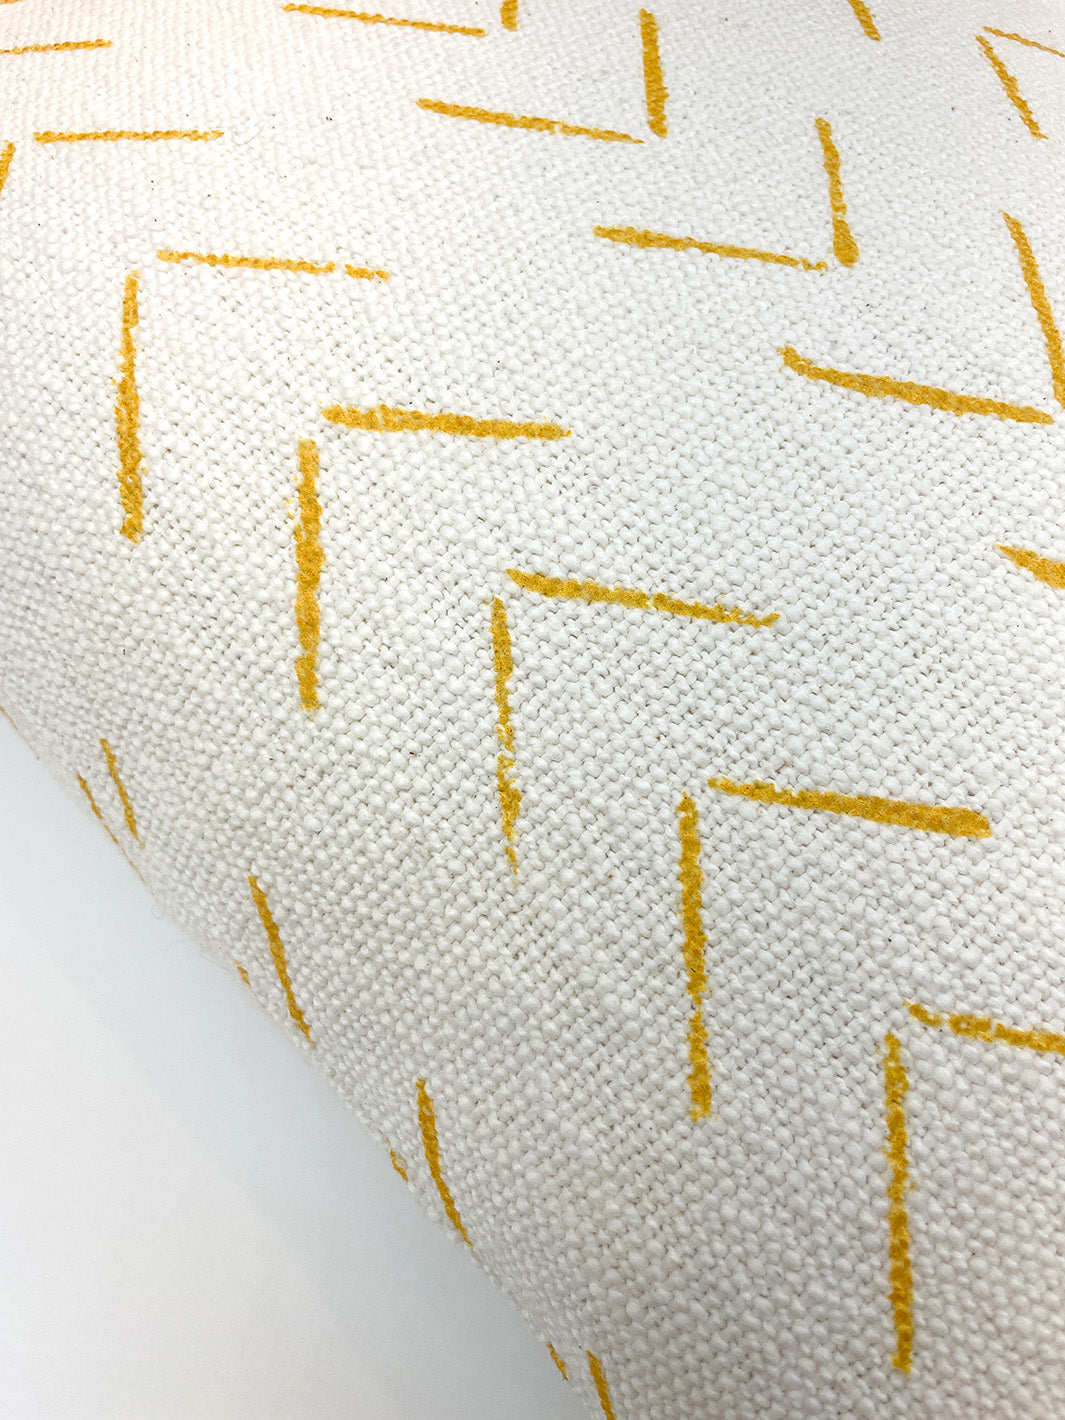 'Fabric by the Yard - Arrows - Gold on California Cotton